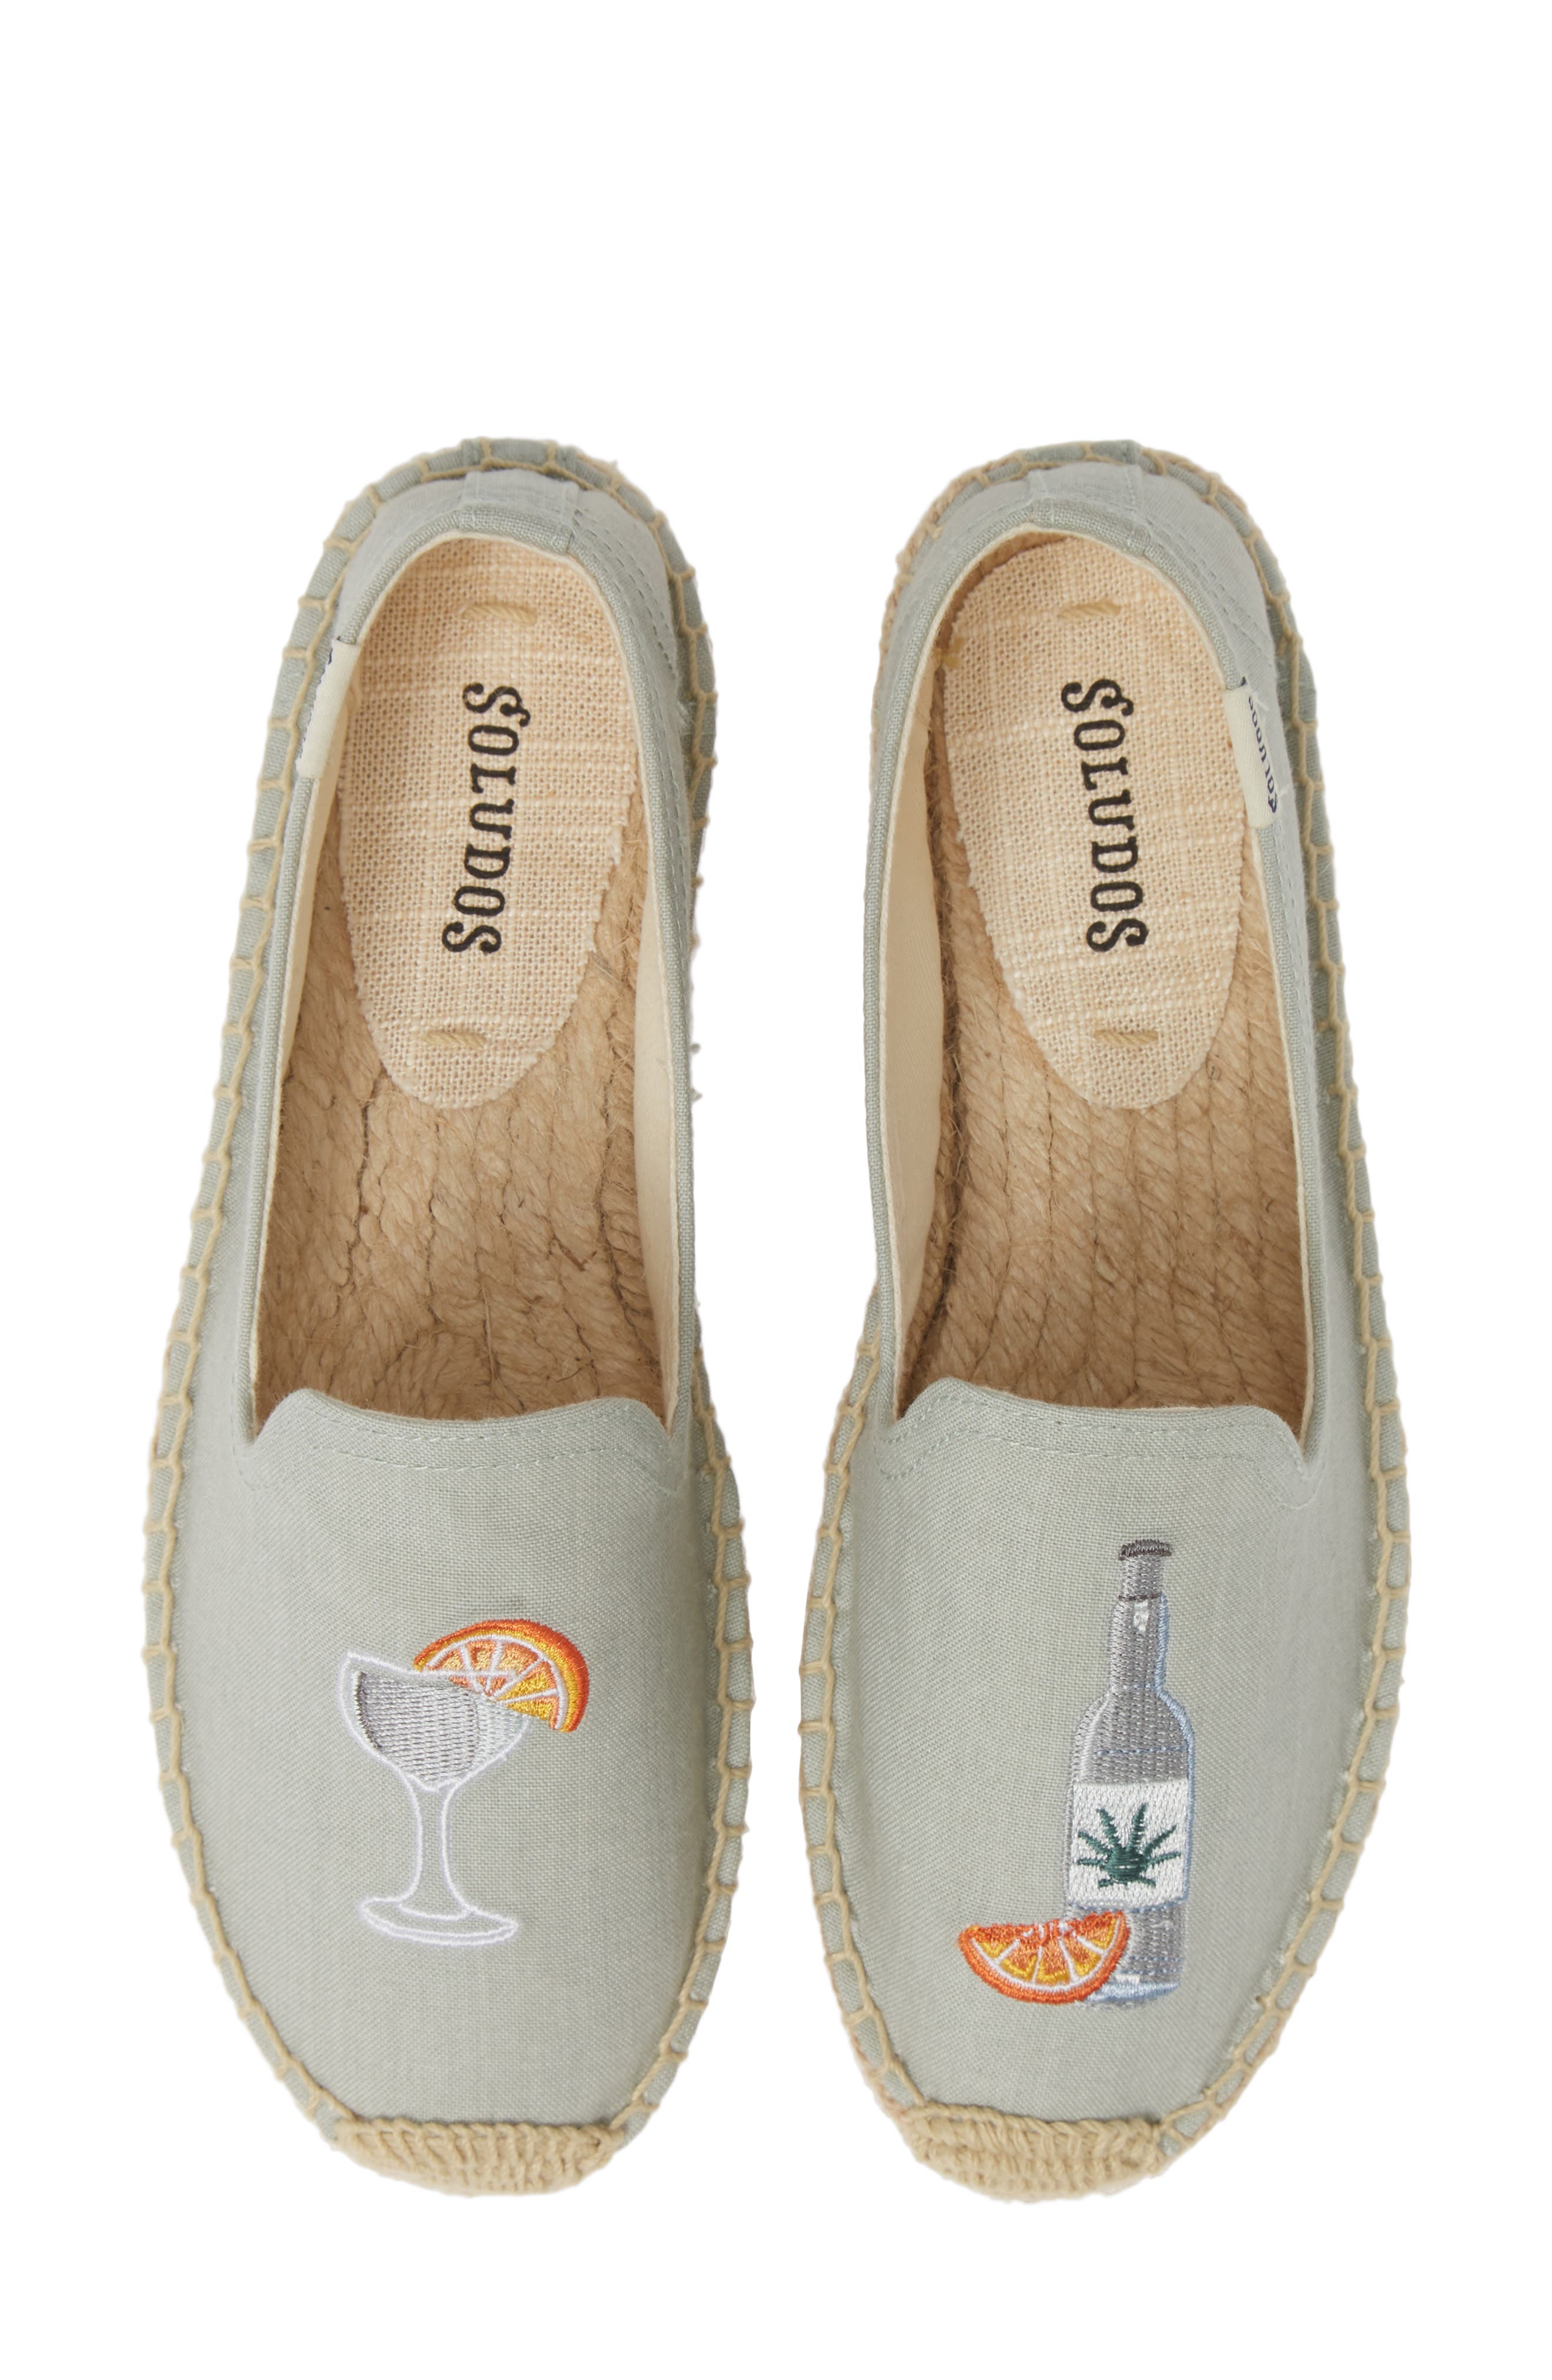 soludos embroidered espadrilles